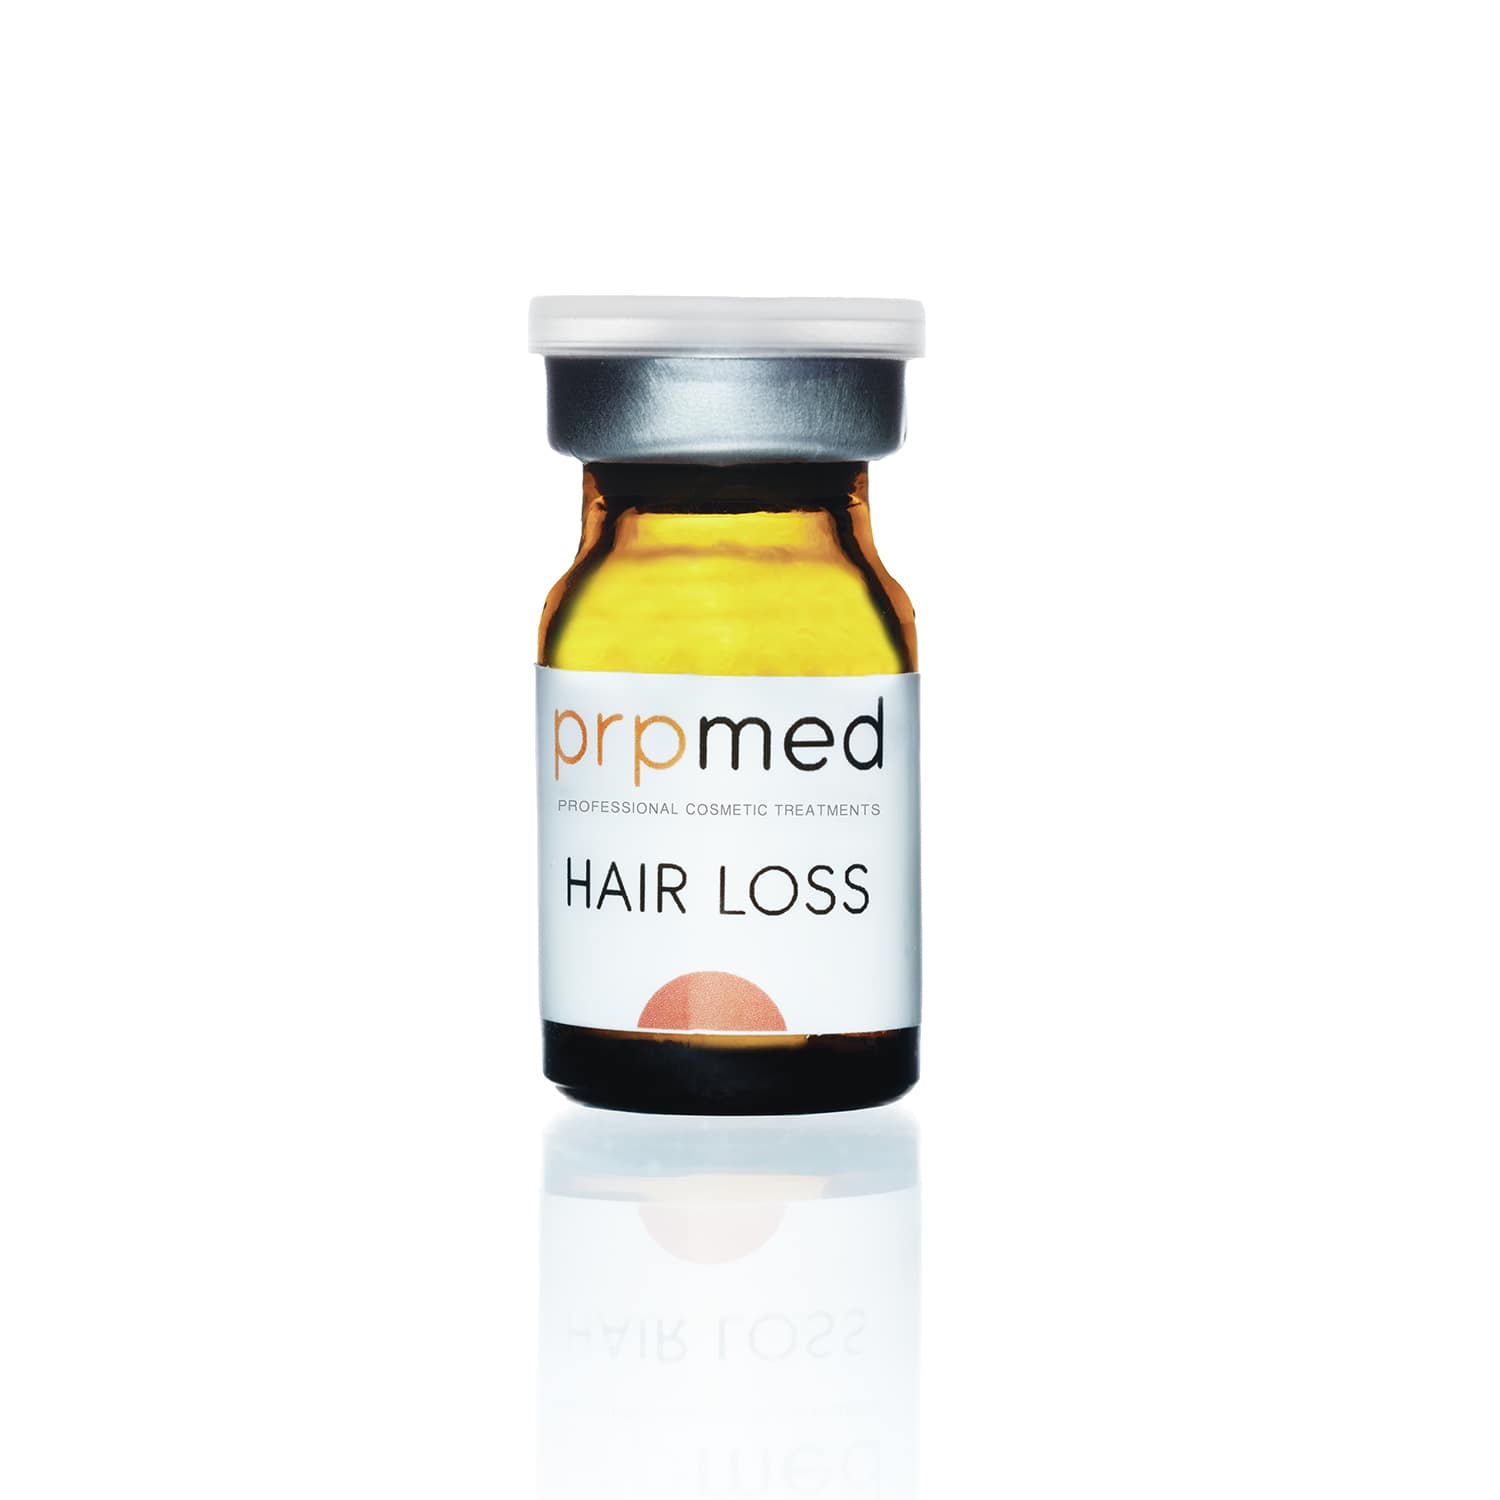 Hair Loss by Prpmed Professional Cosmetic Treatments